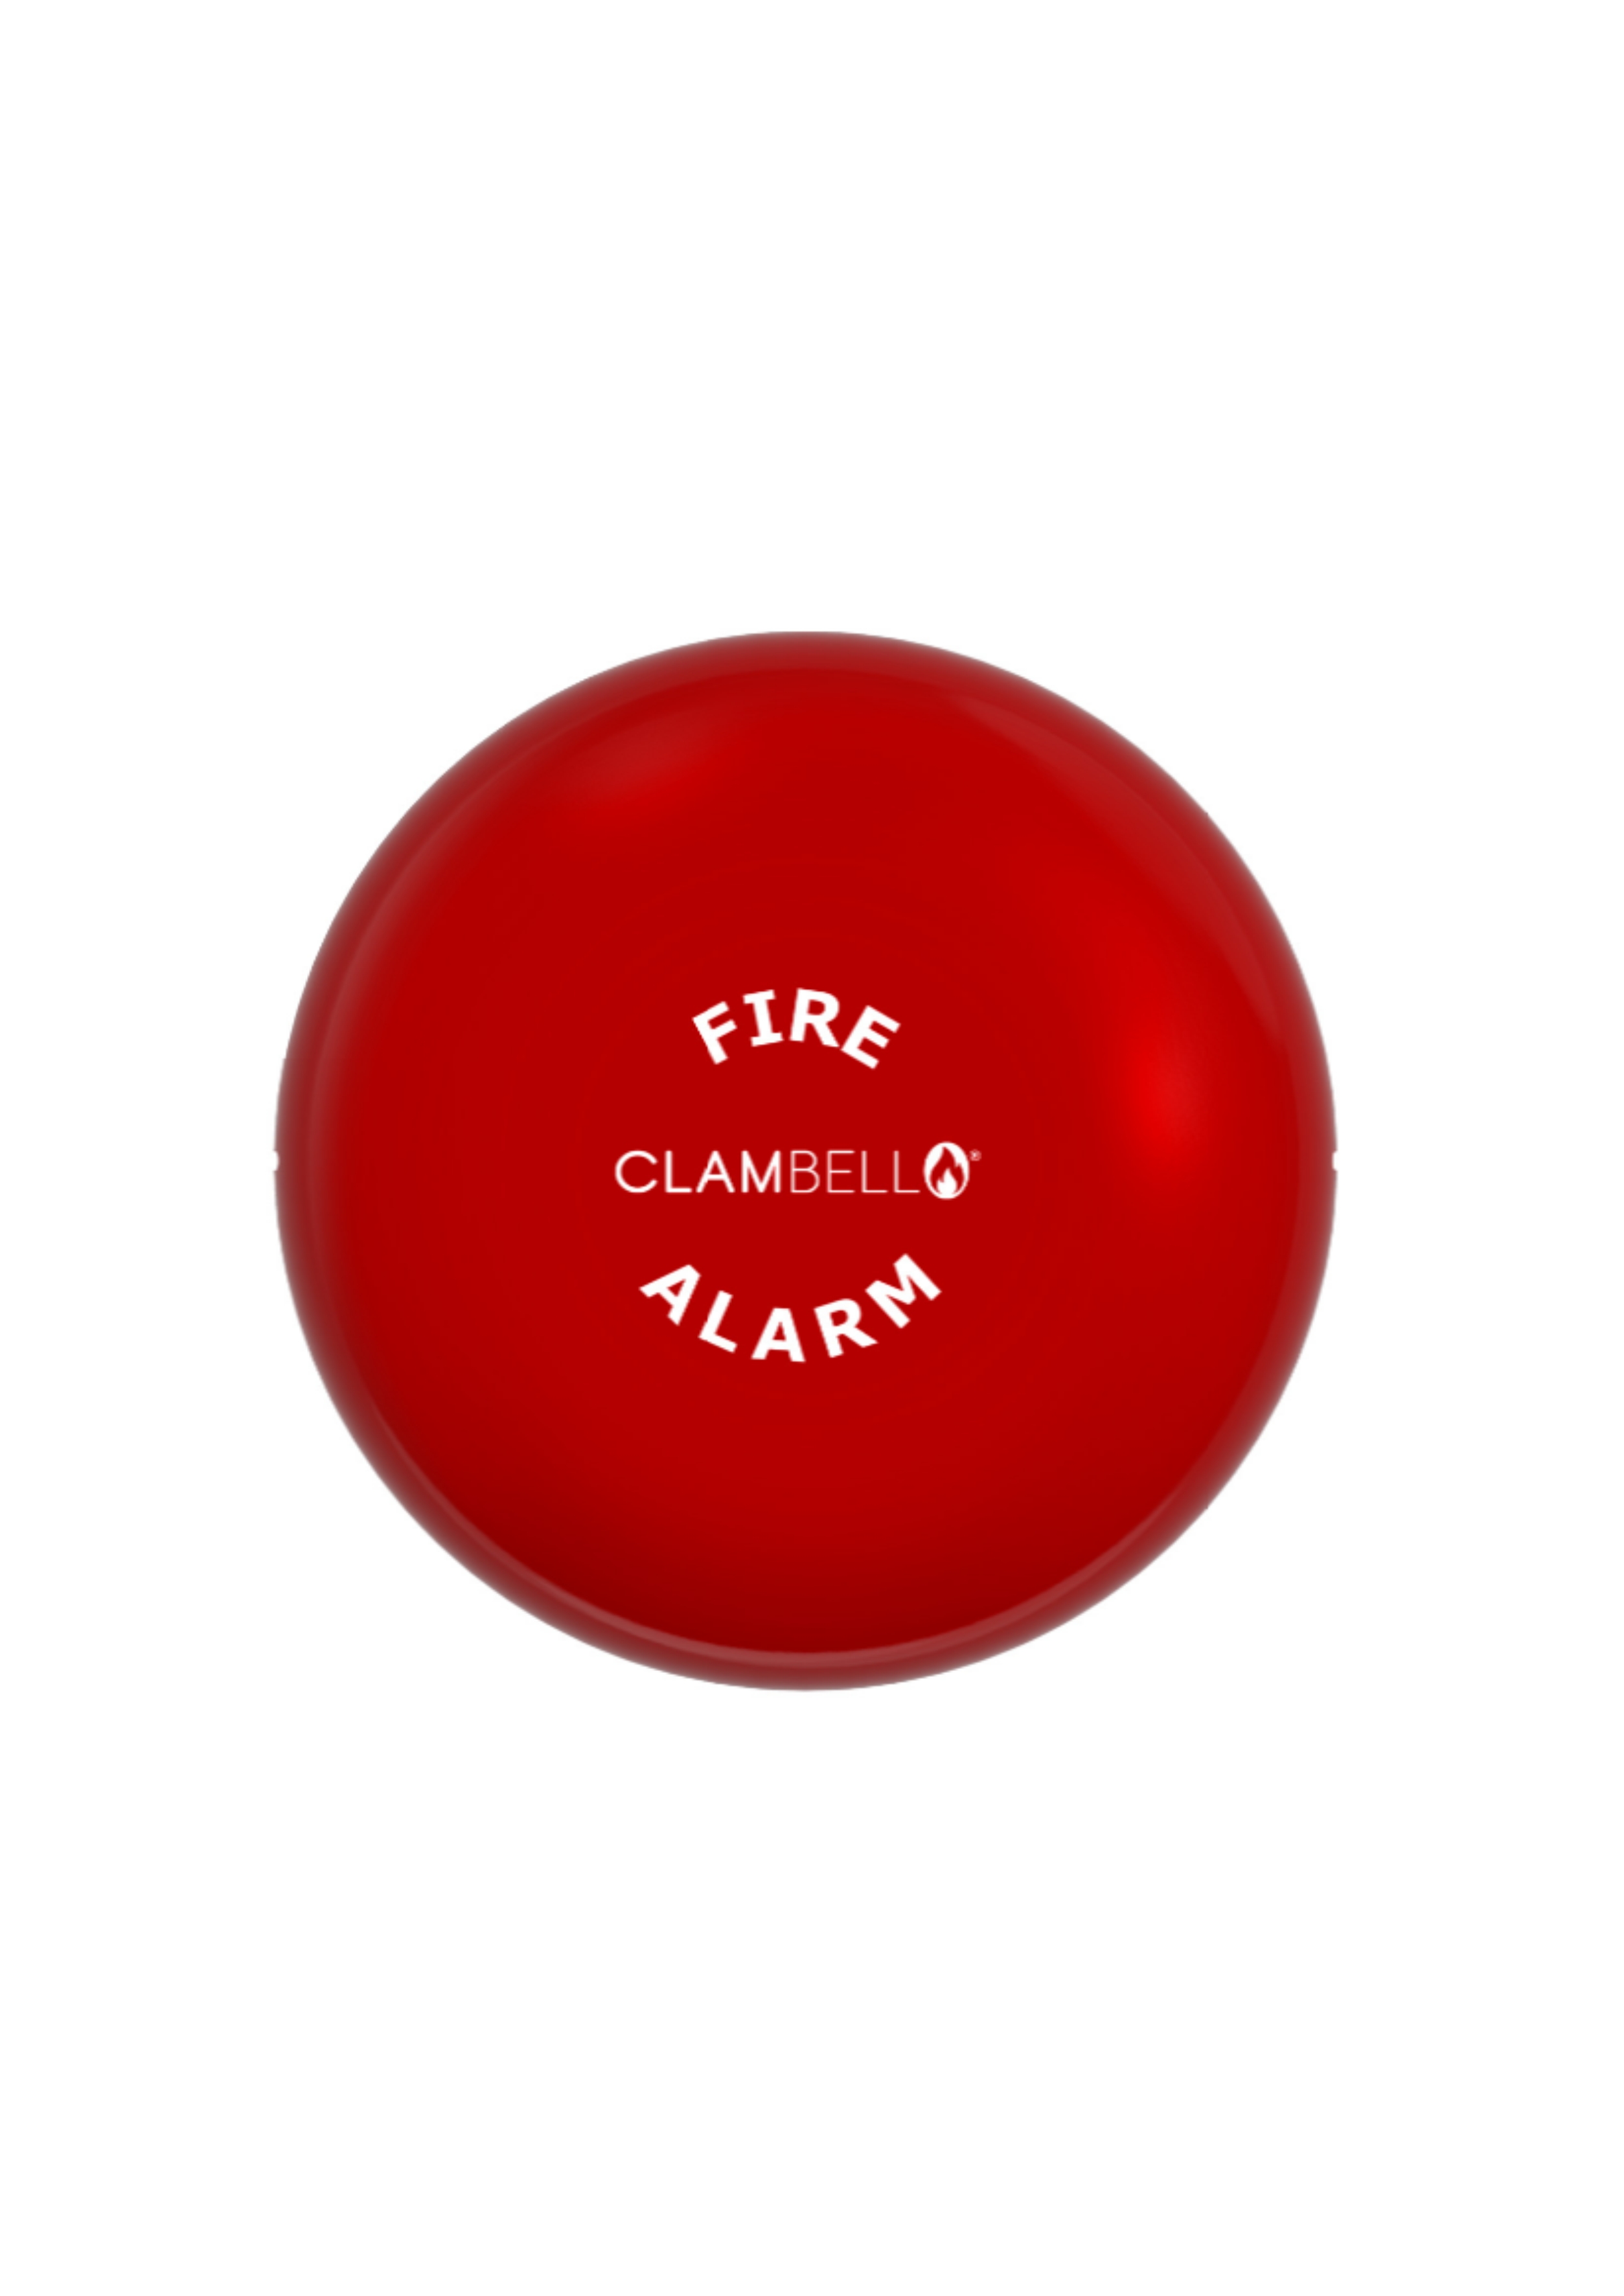 ClamBell 24V 6 inch Fire Alarm Bell - Shallow Base...